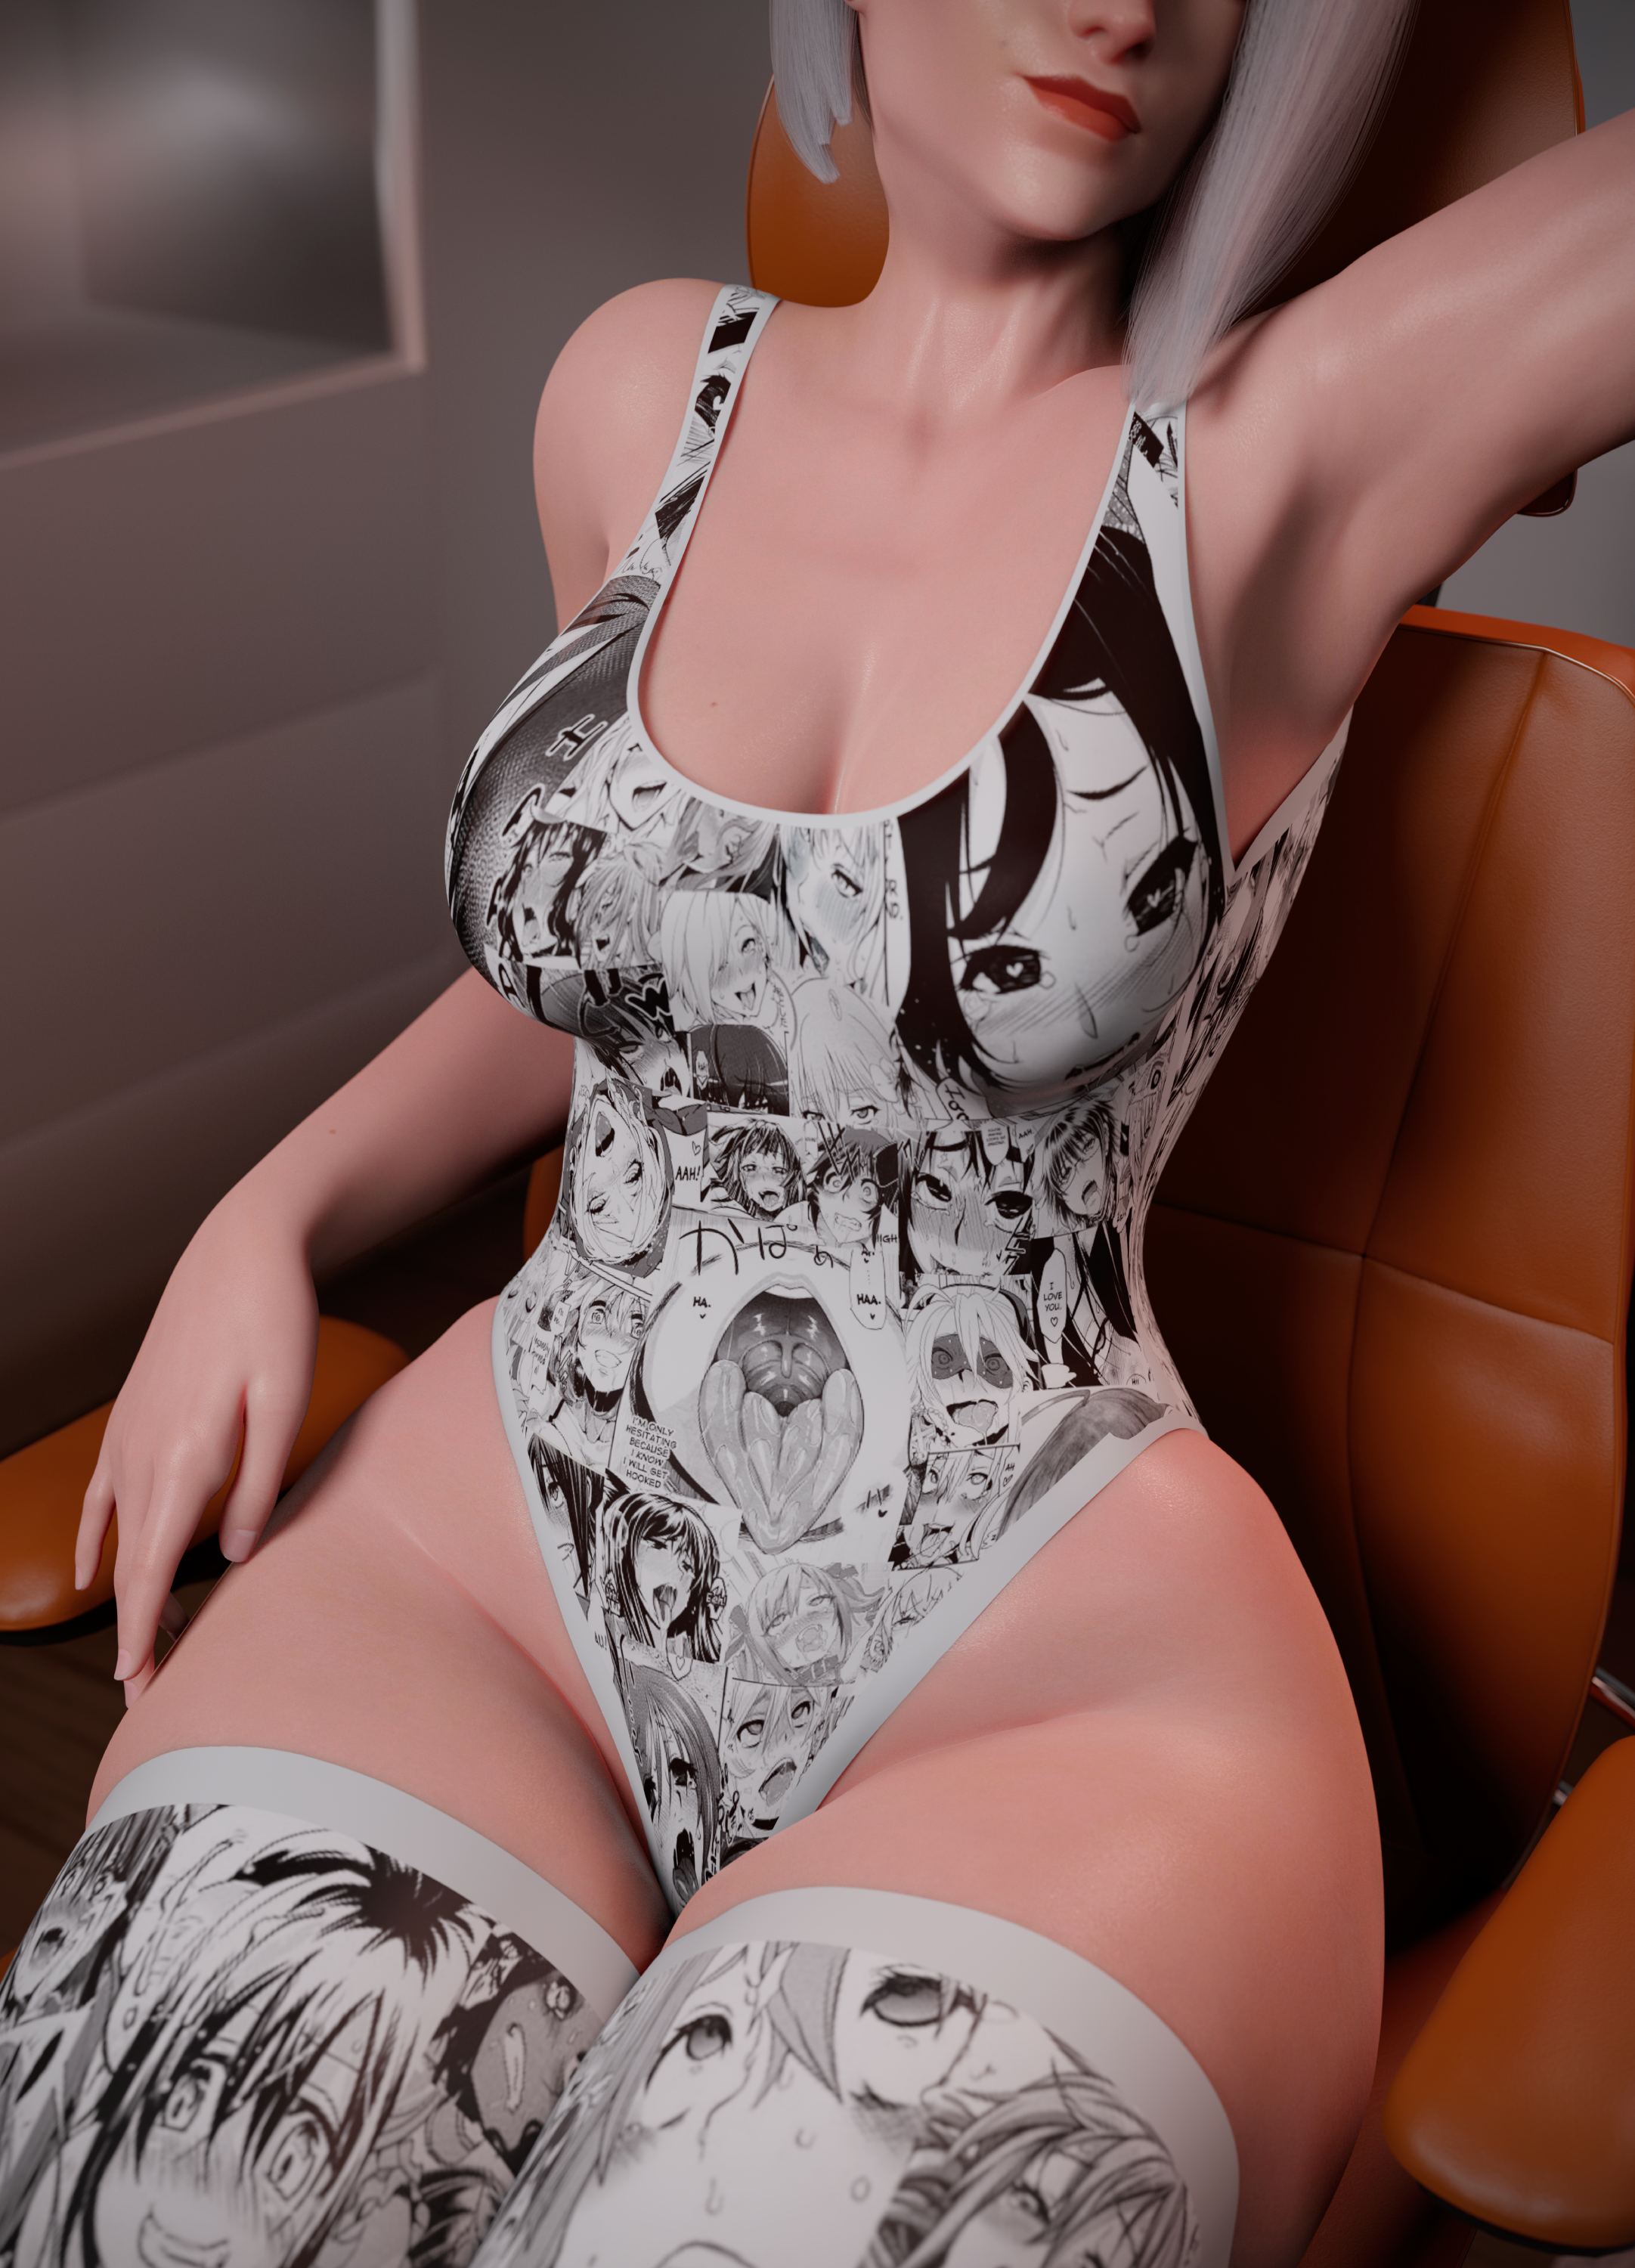 General 2163x3000 Ashe (Overwatch) Overwatch video games video game girls bodysuit Ahegao Collage stockings cleavage thick thigh closeup artwork fan art CGI anime manga